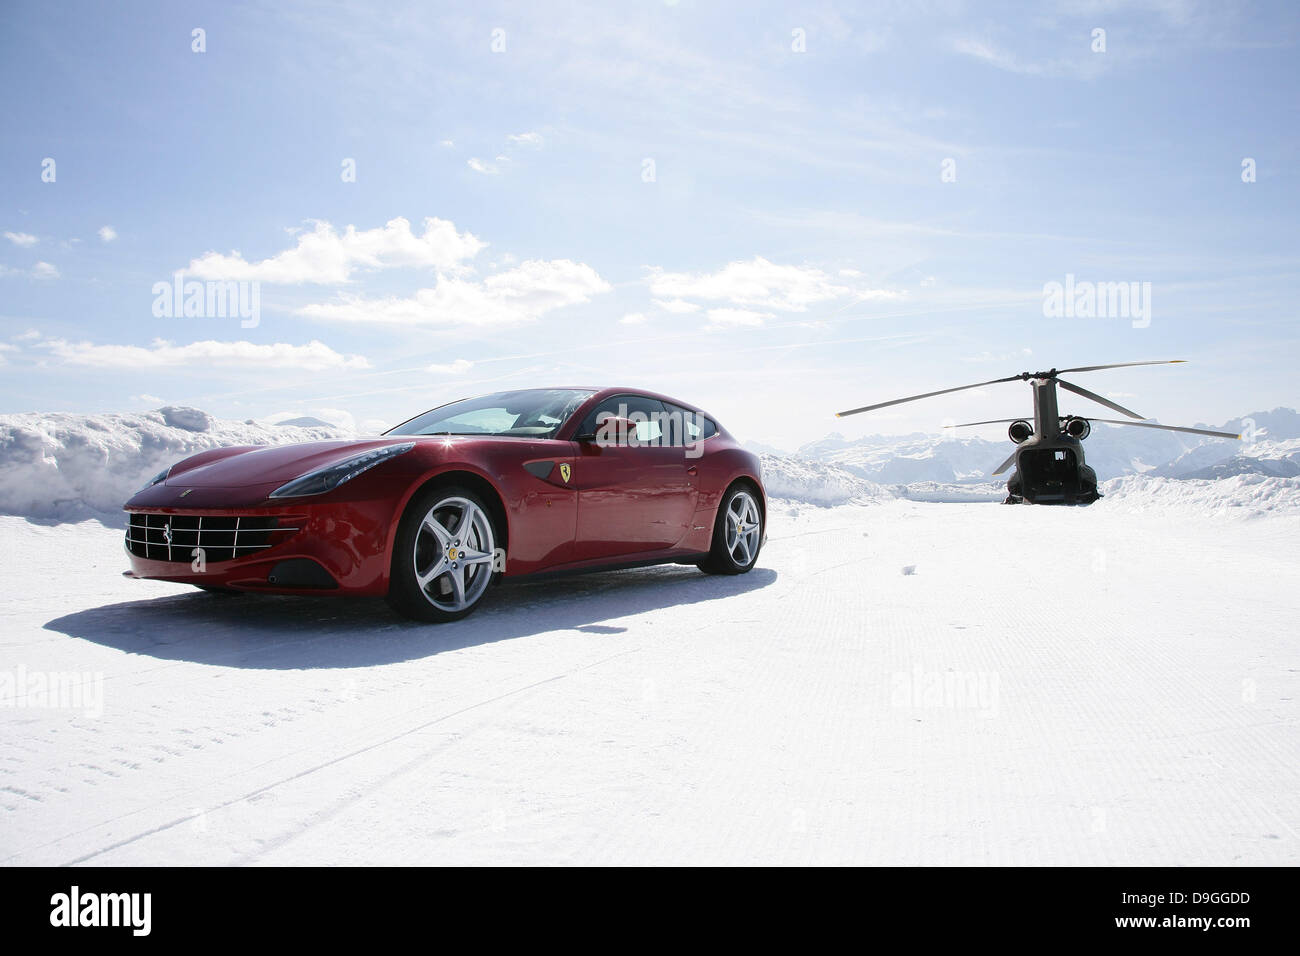 Test drive the new Ferrari on the top of Plan de Corones at 2,350 metres! Only a couple of days to go for the start of the FF tests by the press, where journalists from all over the world will drive the new V12 Ferrari for the first time on the roads of the Südtirol region: two Ferrari four-seaters with four-wheel drive have been taken to the top of Plan De Corones in the Dolomites Stock Photo